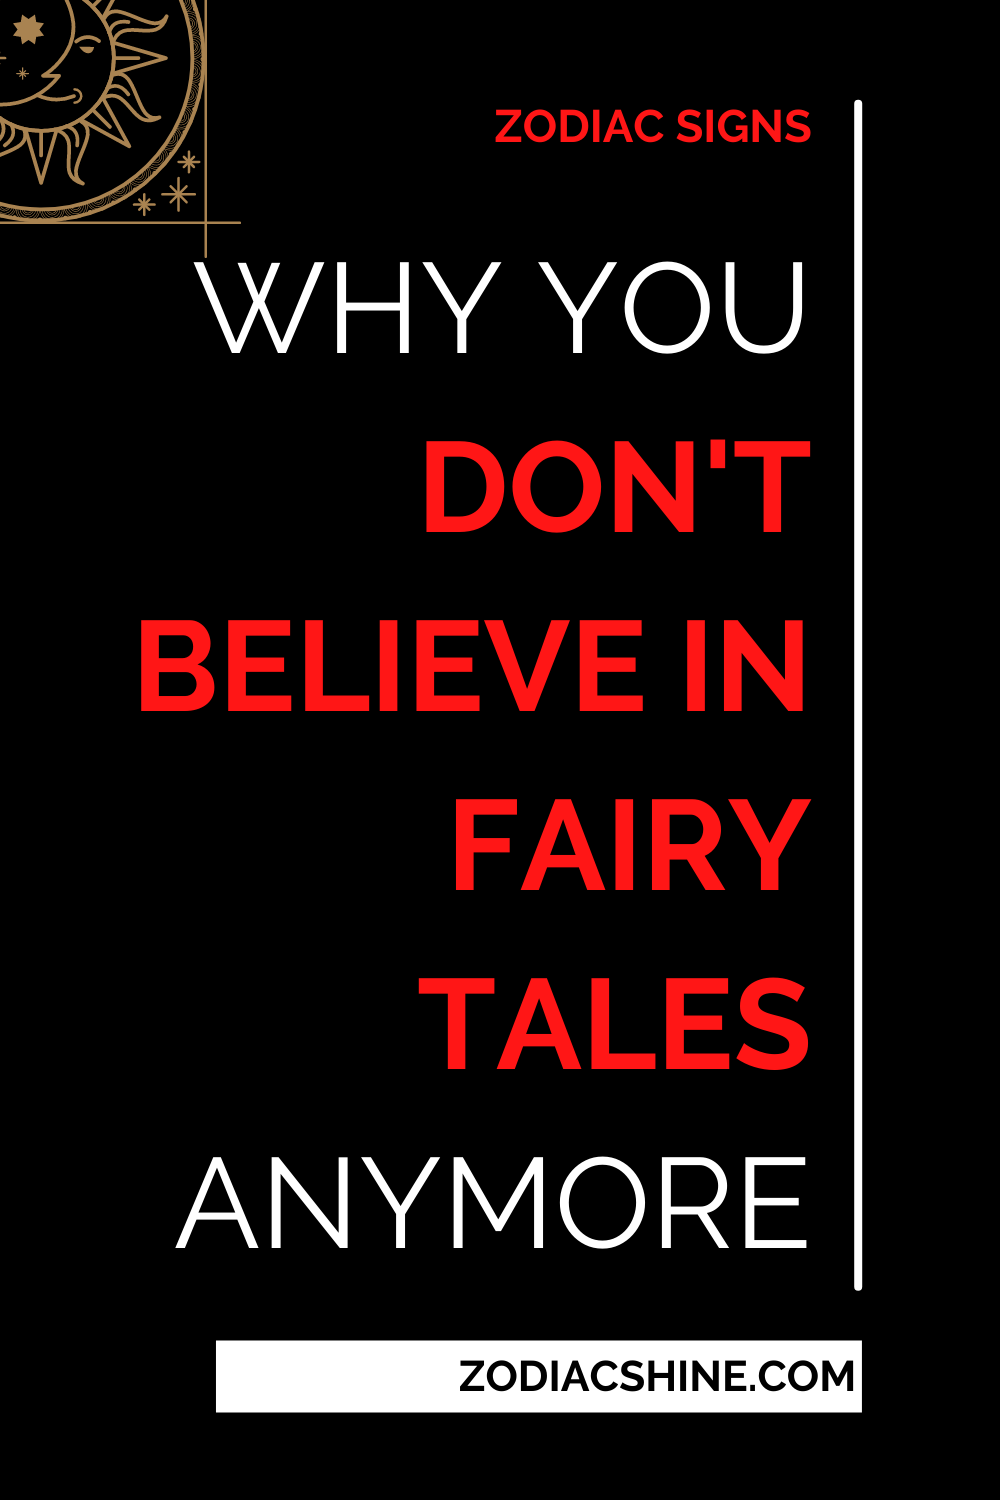 Why You Don't Believe In Fairy Tales Anymore